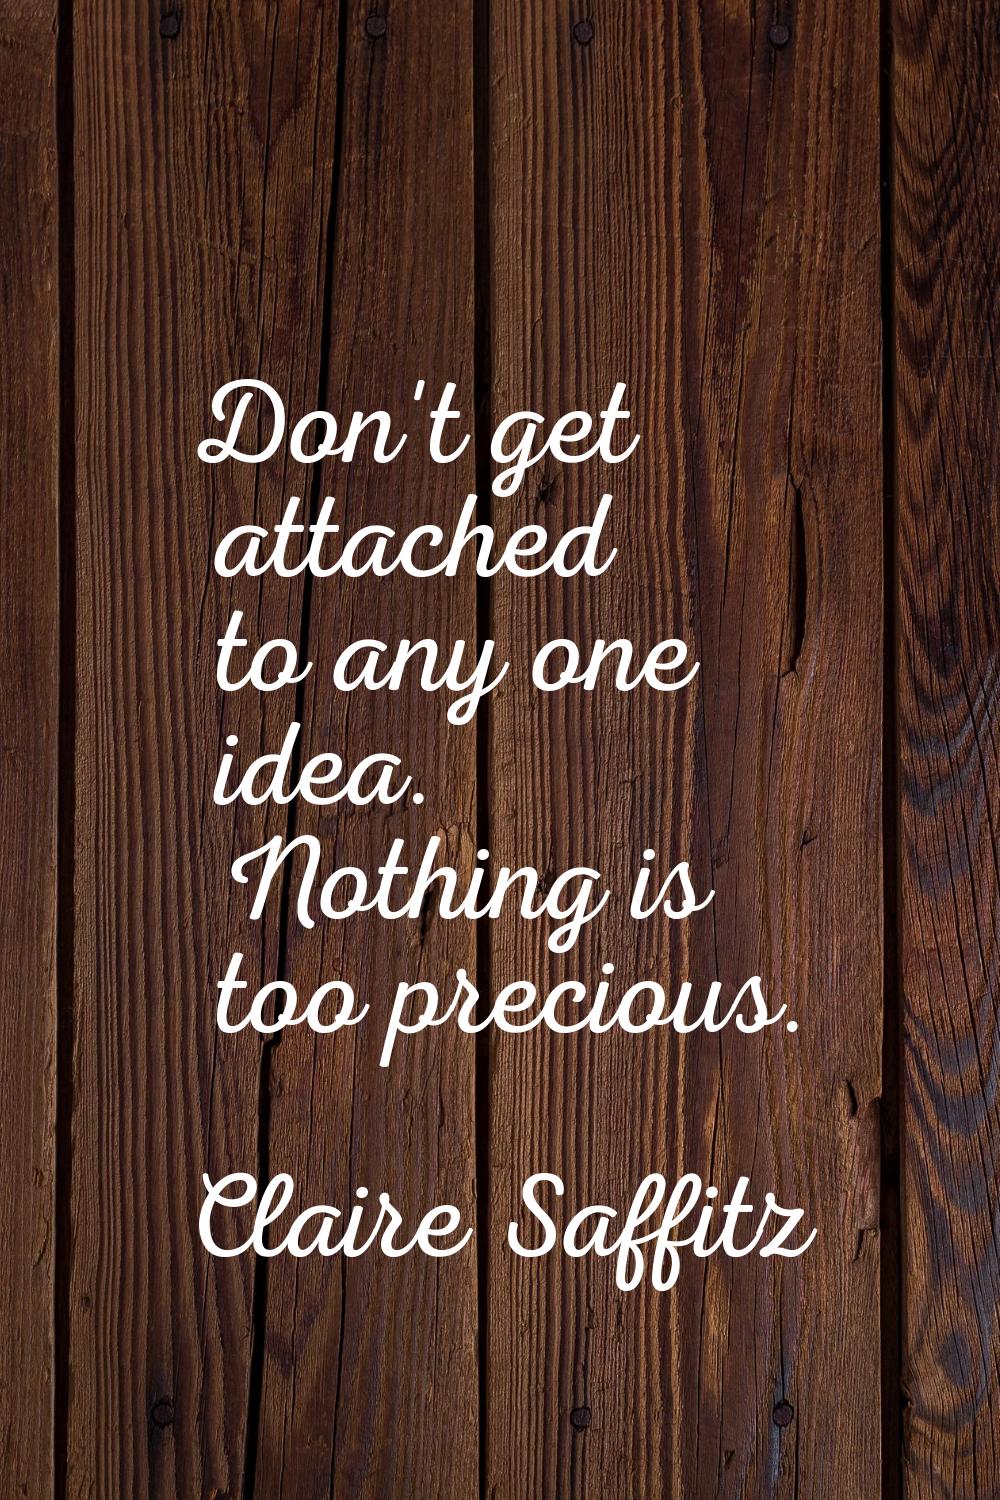 Don't get attached to any one idea. Nothing is too precious.